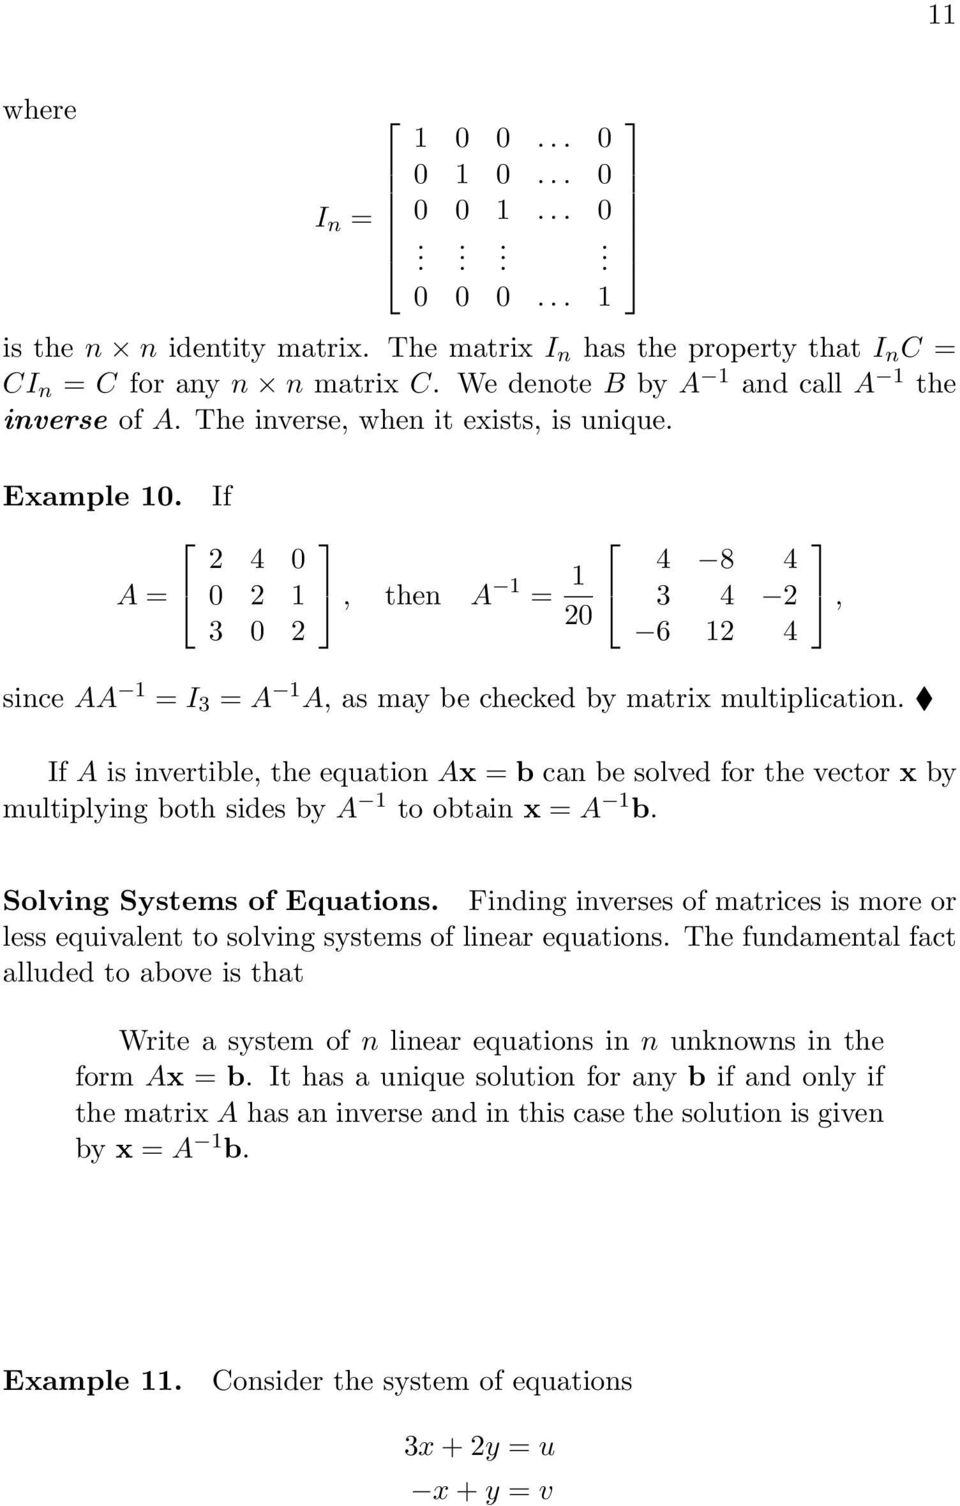 sides by A to obtain x = A b, Solving Systems of Equations Finding inverses of matrices is more or less equivalent to solving systems of linear equations The fundamental fact alluded to above is that